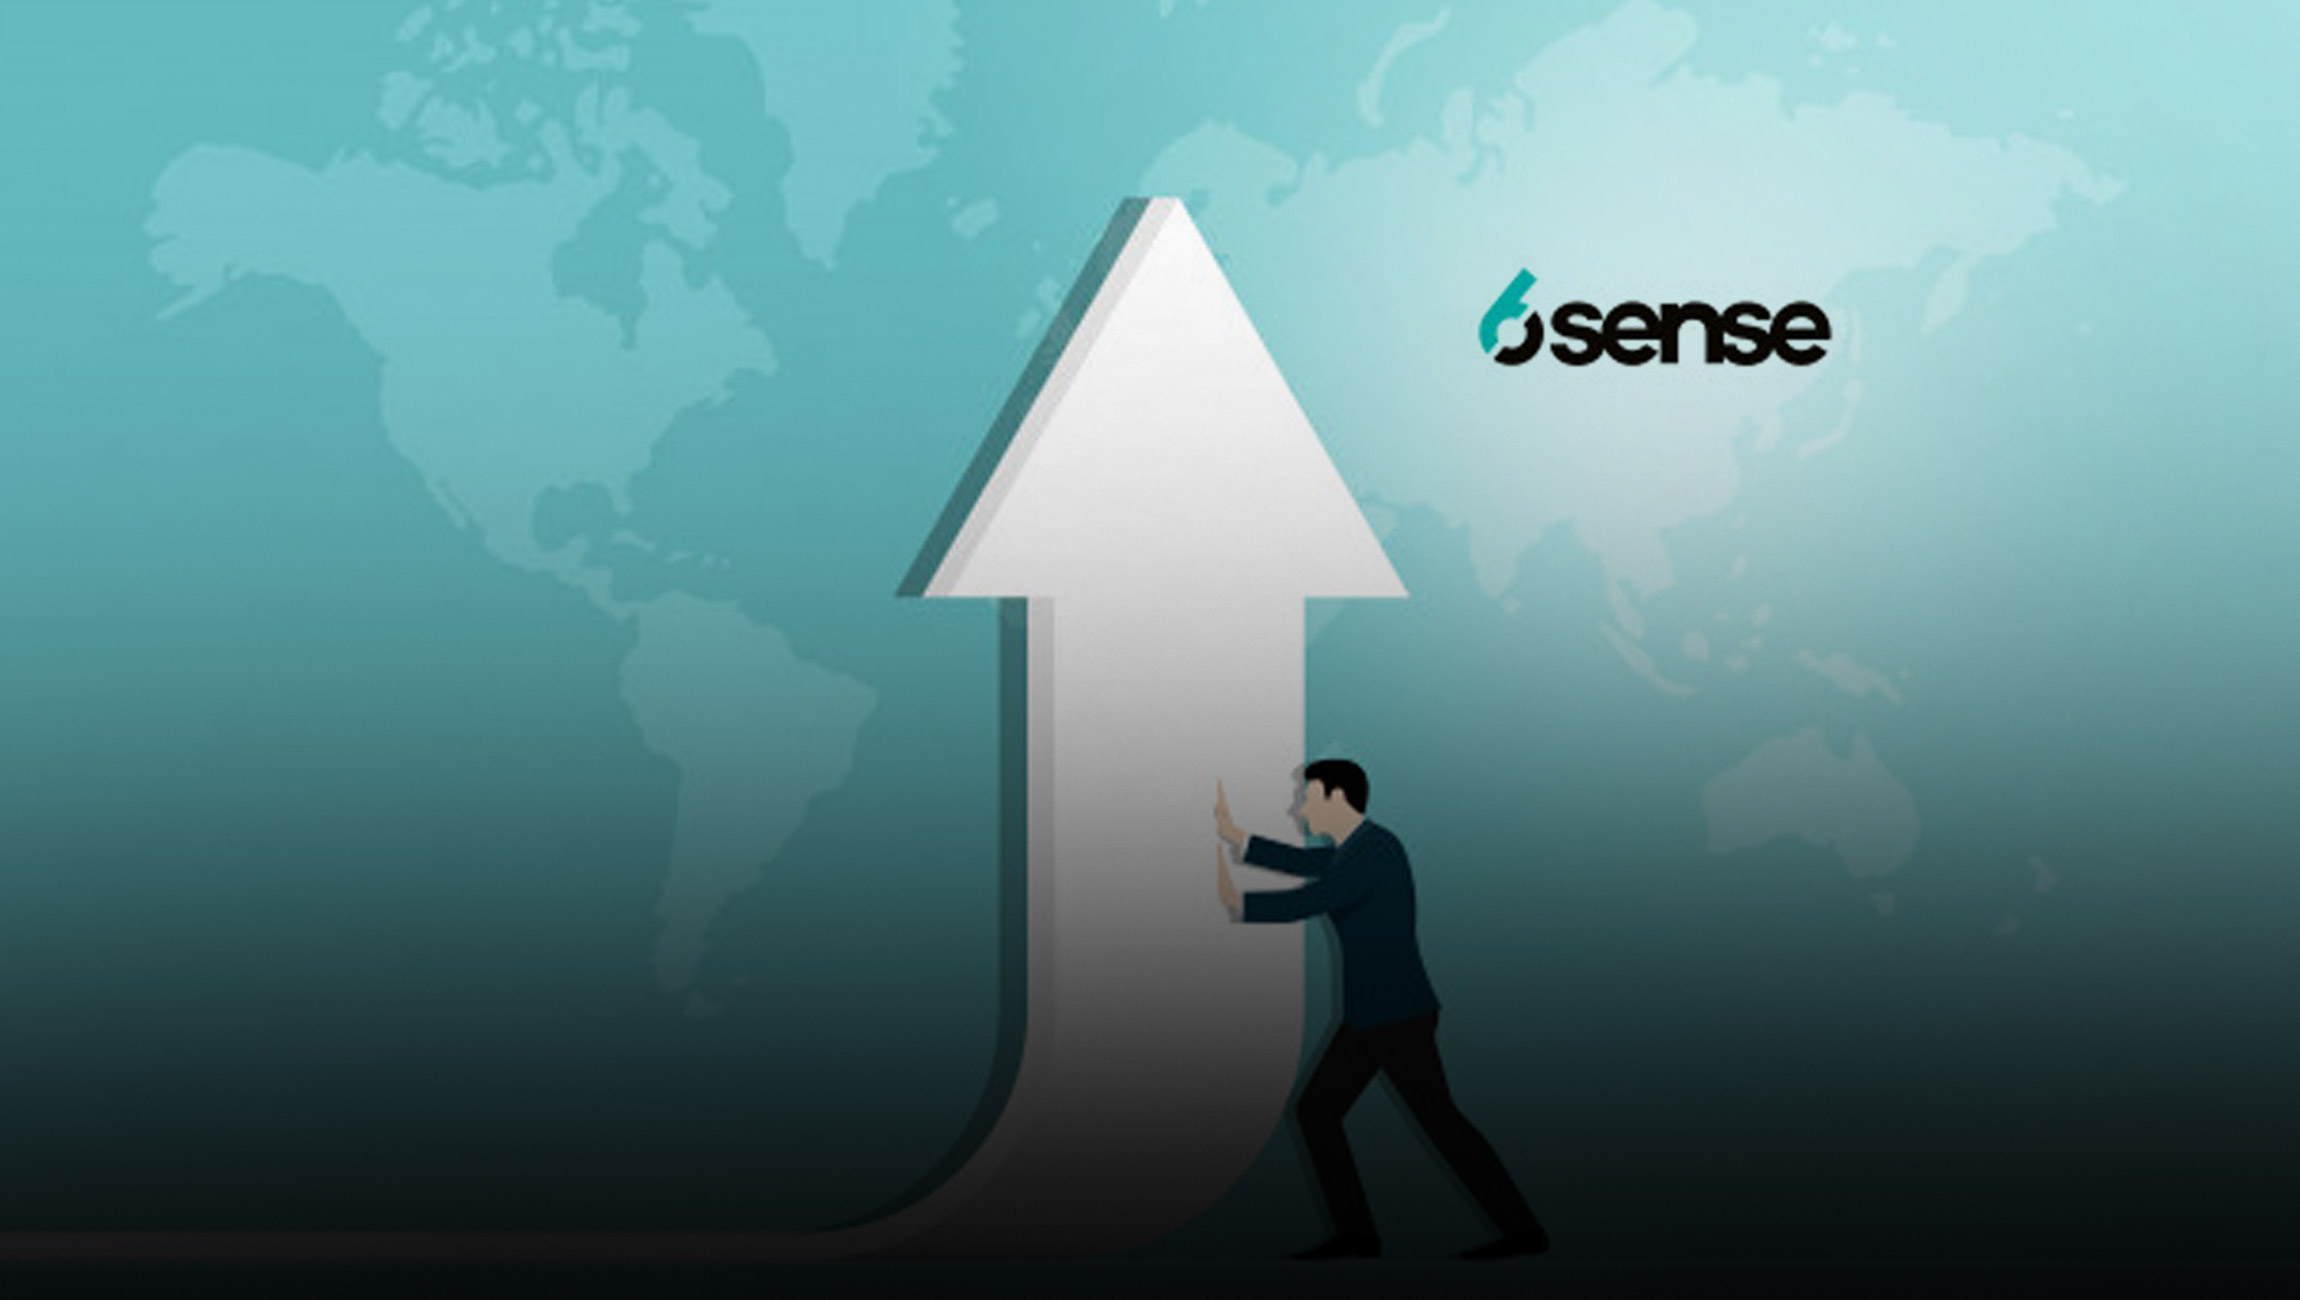 6sense Momentum Continues with Record-Breaking Performance for Third Consecutive Year